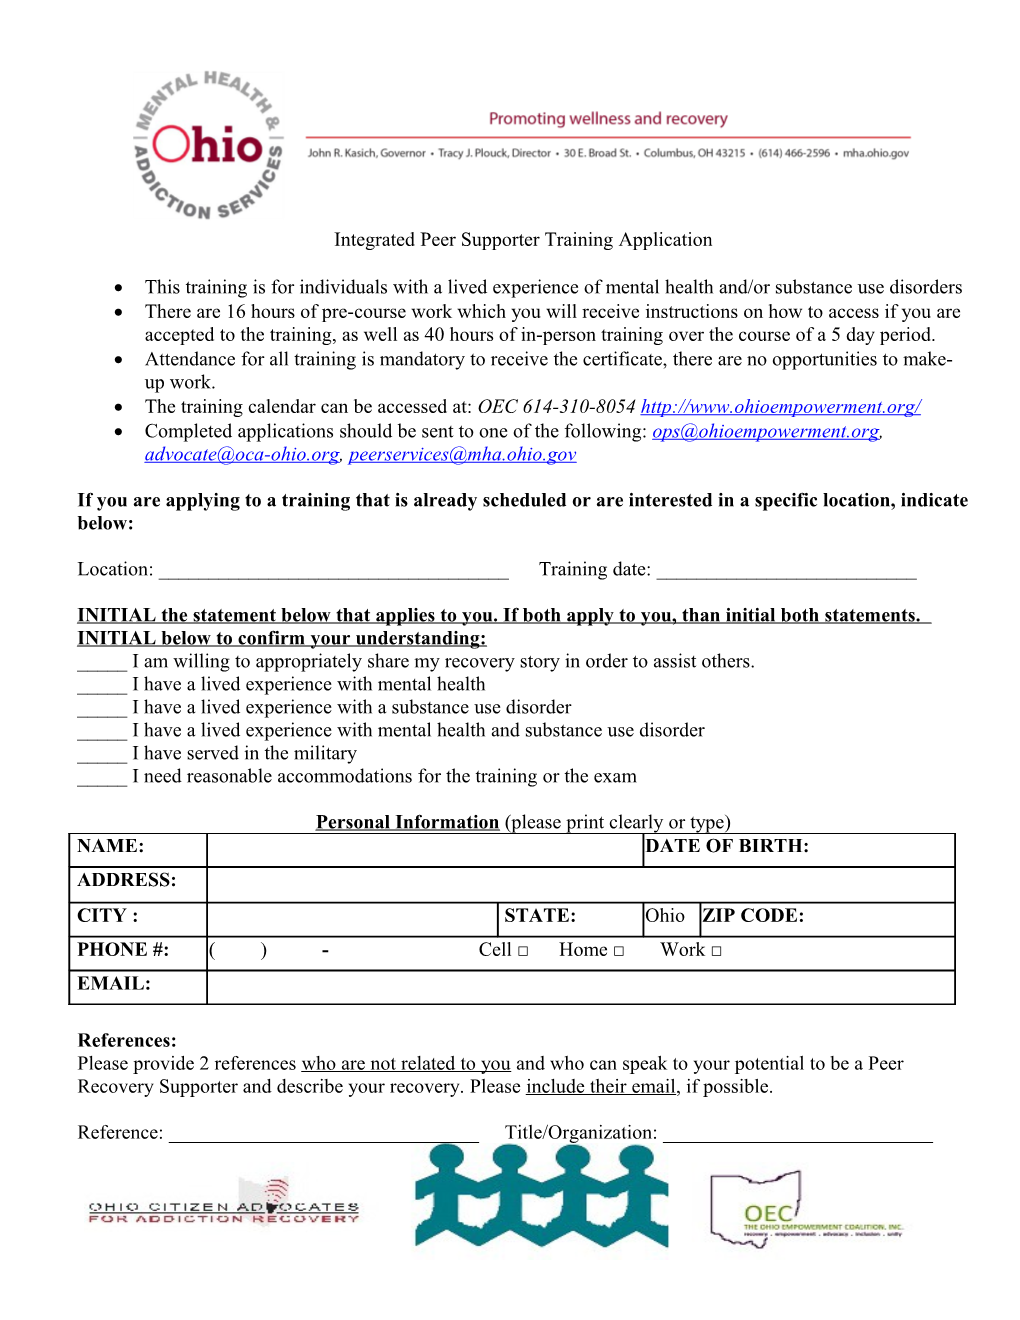 Integrated Peer Supporter Training Application